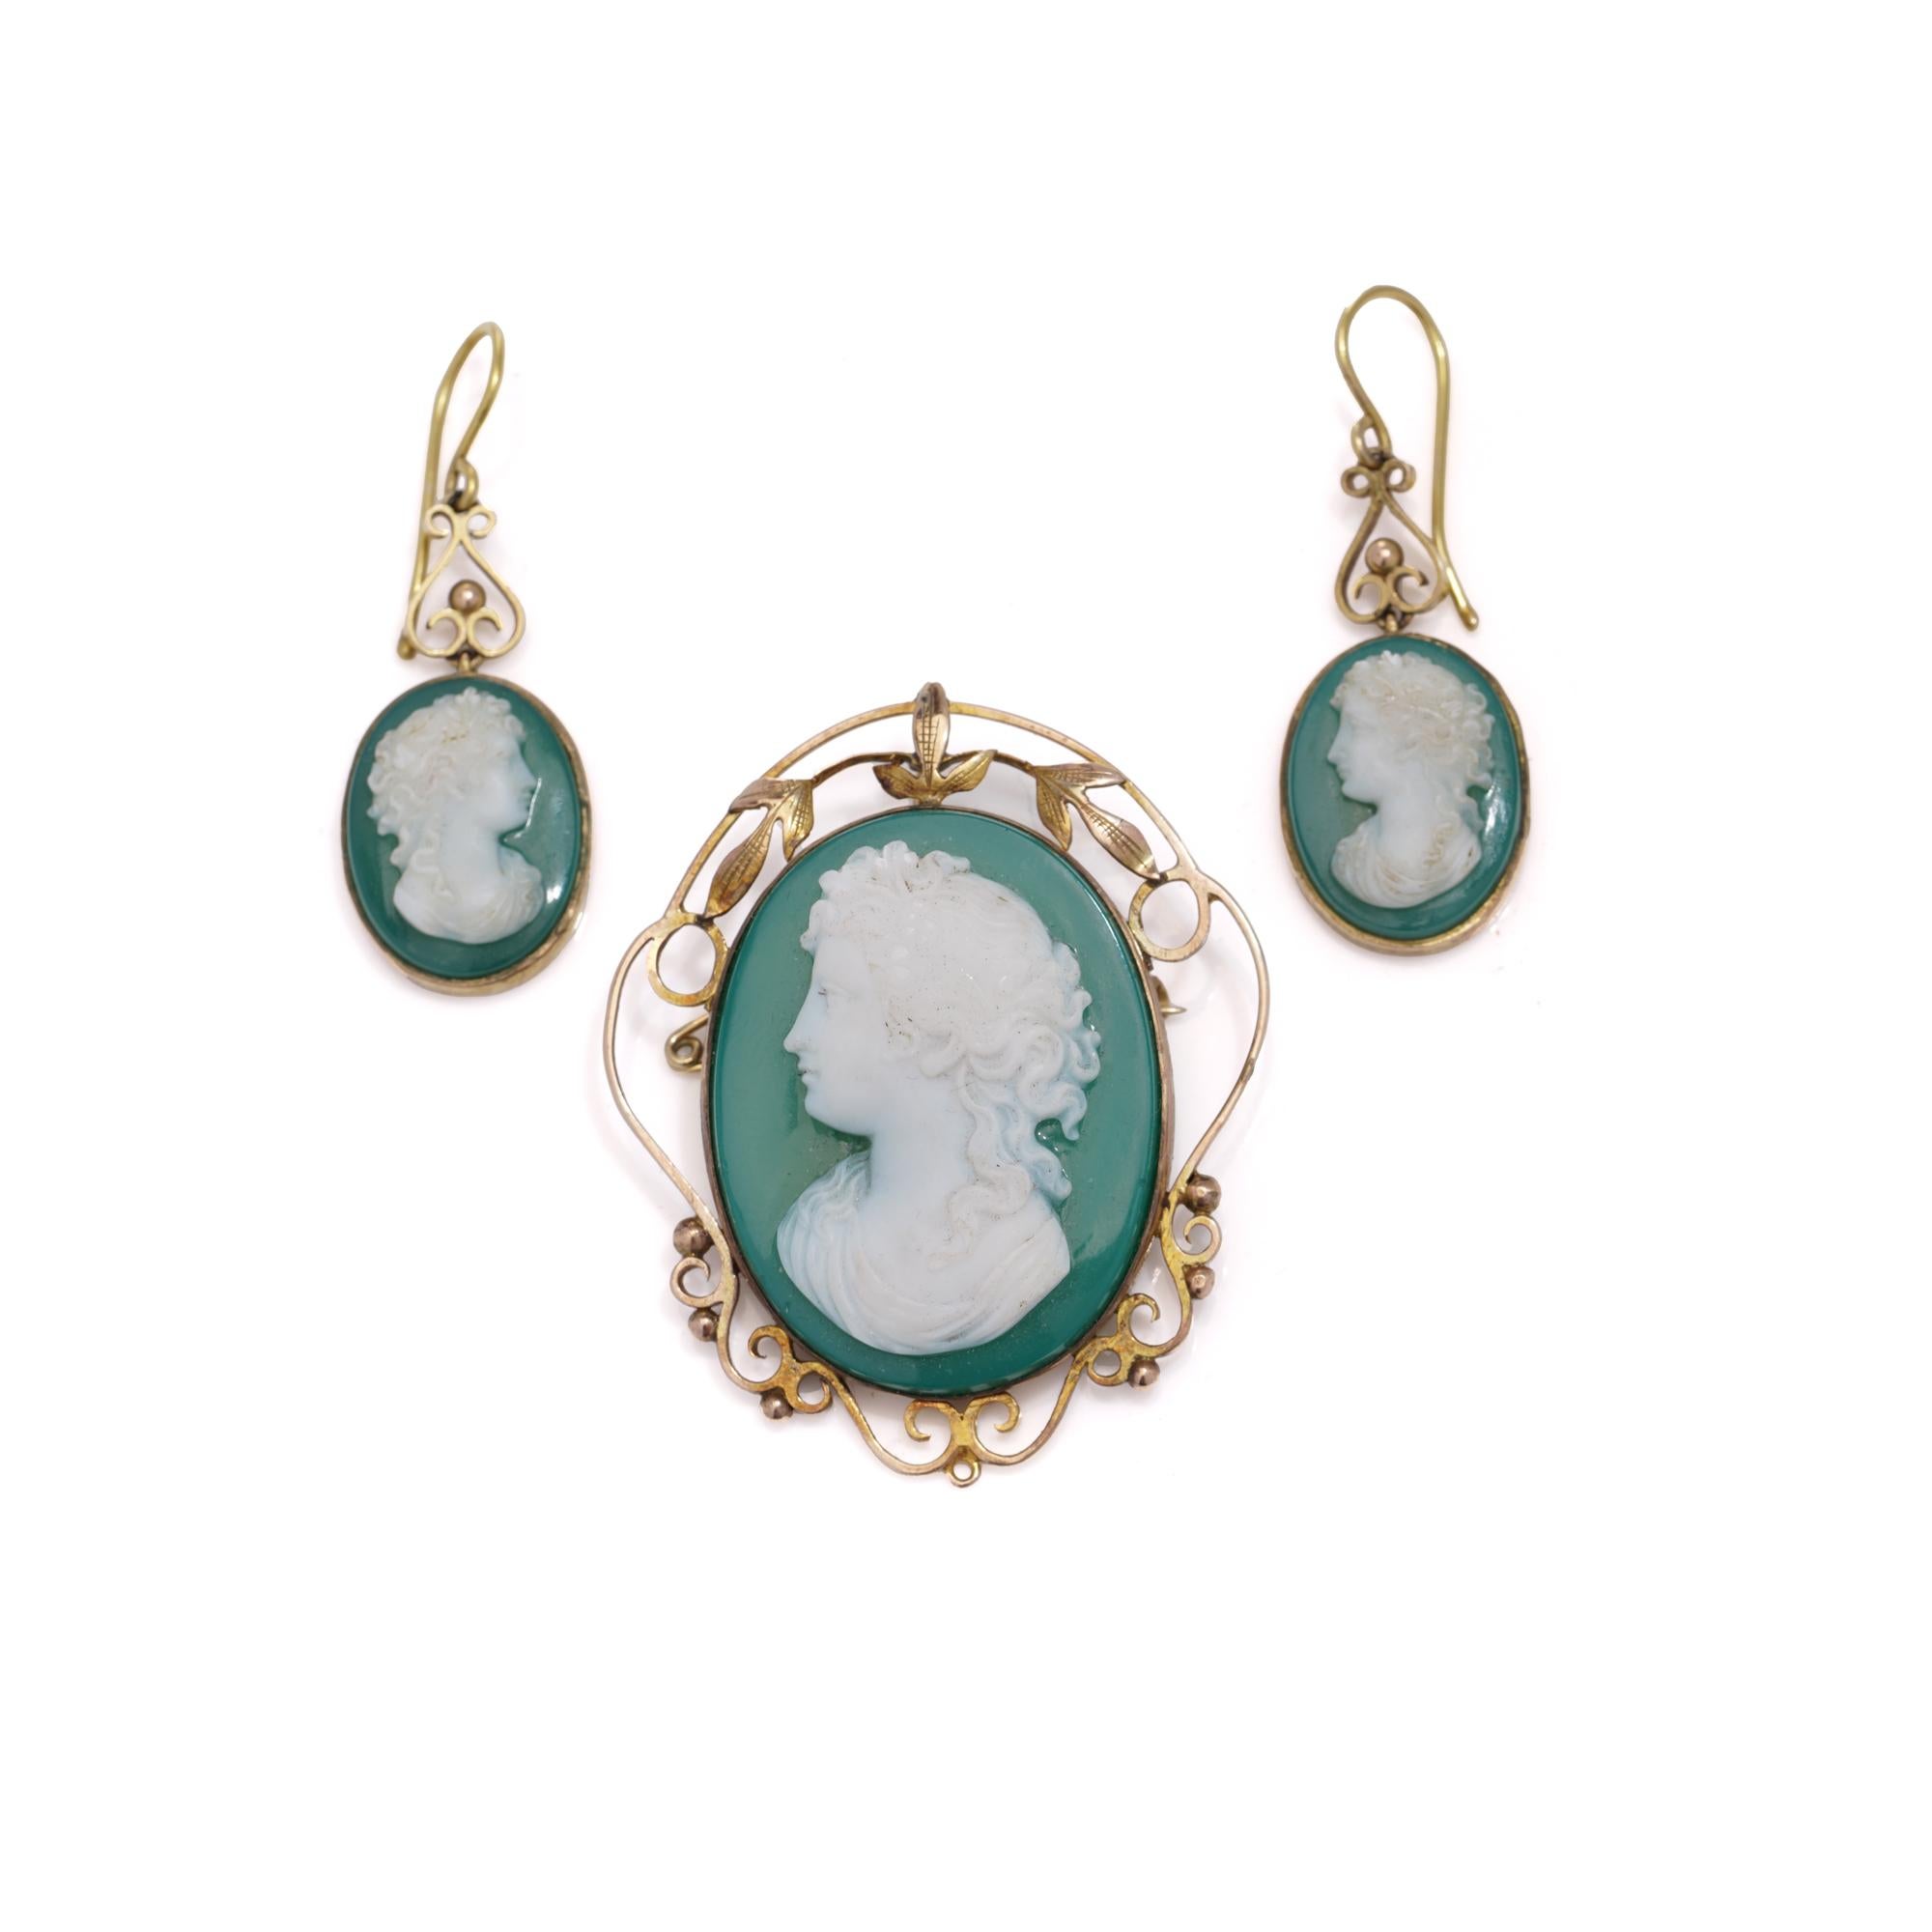 Antique Victorian suite crafted in 9kt yellow gold featuring green and white agate. Includes a brooch depicting a lady in profile adorned with an ivy garland, along with earrings portraying women facing left and right with braided hair.
Comes with